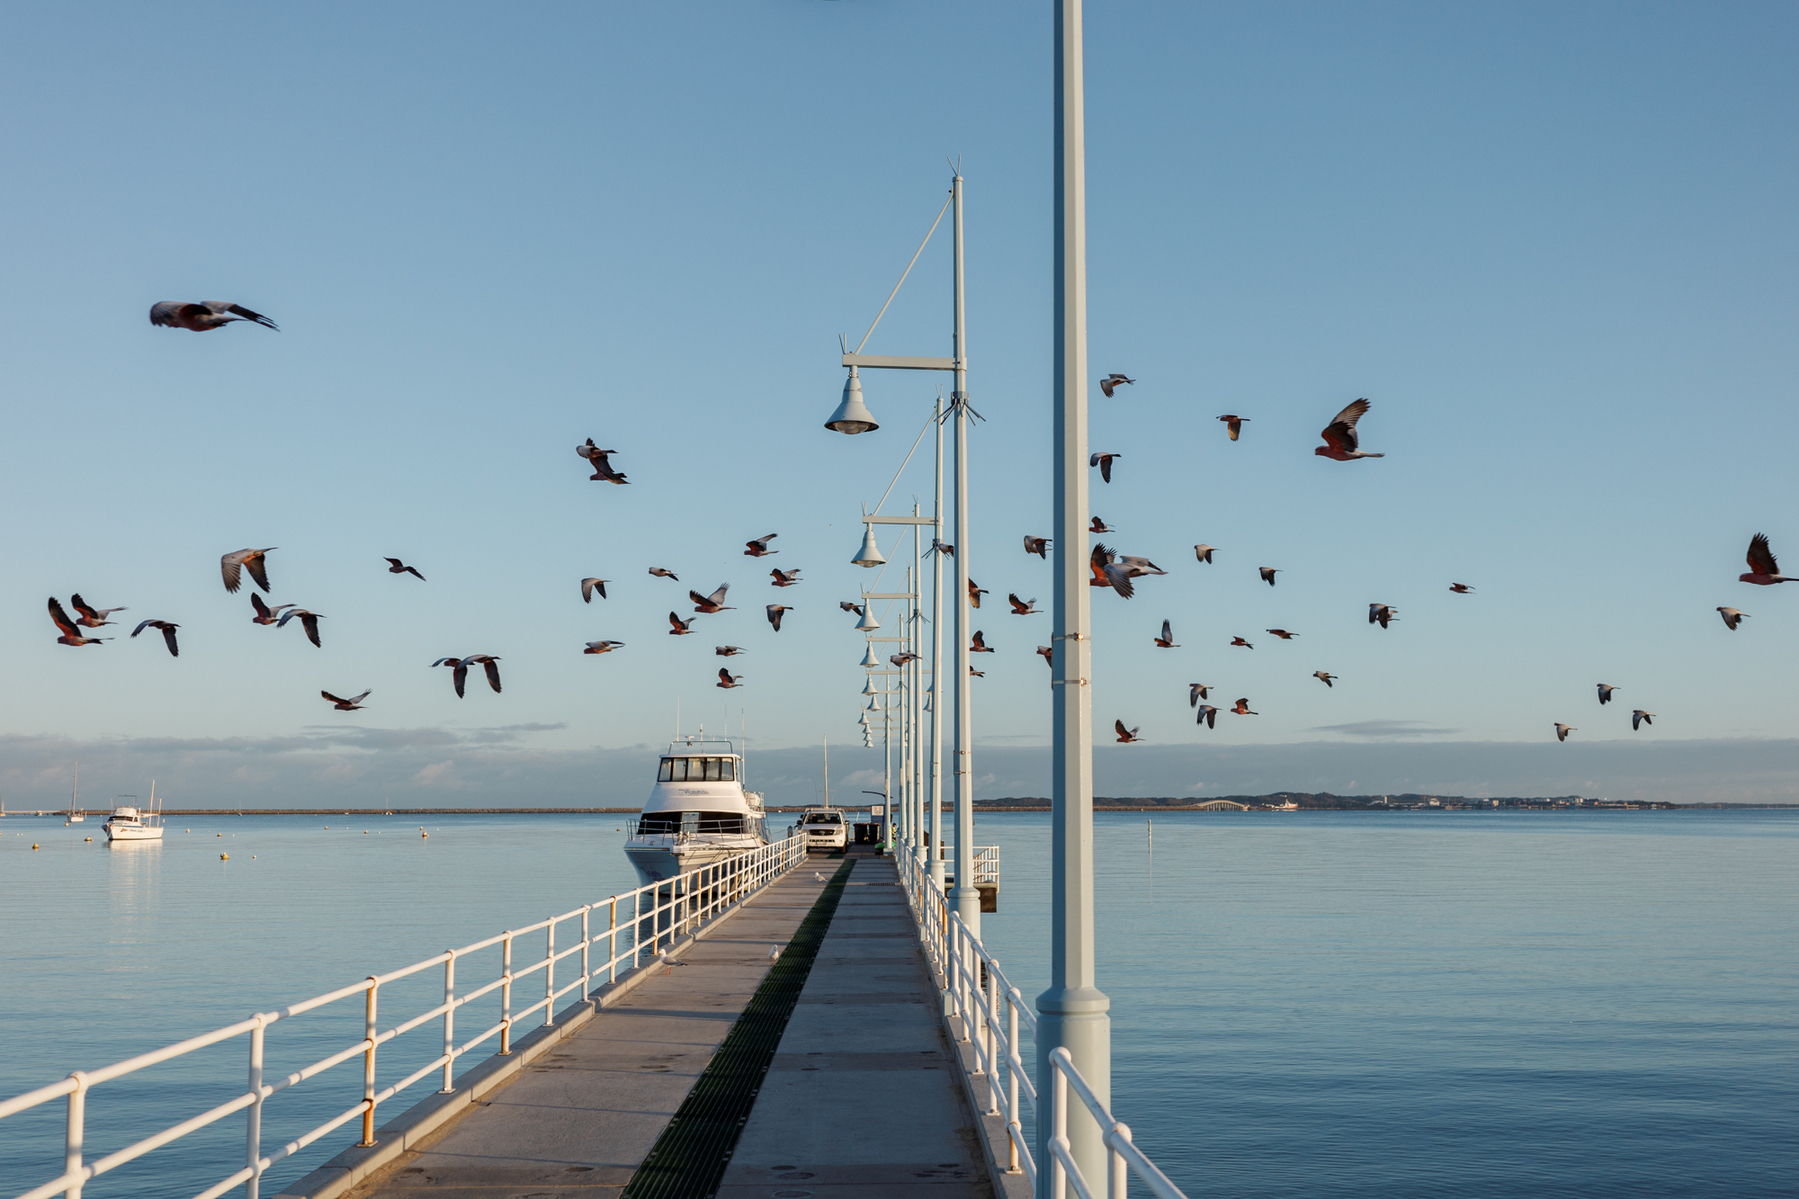 Auto-generated description: A flock of birds is flying above a pier with lamp posts and a boat docked at the end, against a clear blue sky.